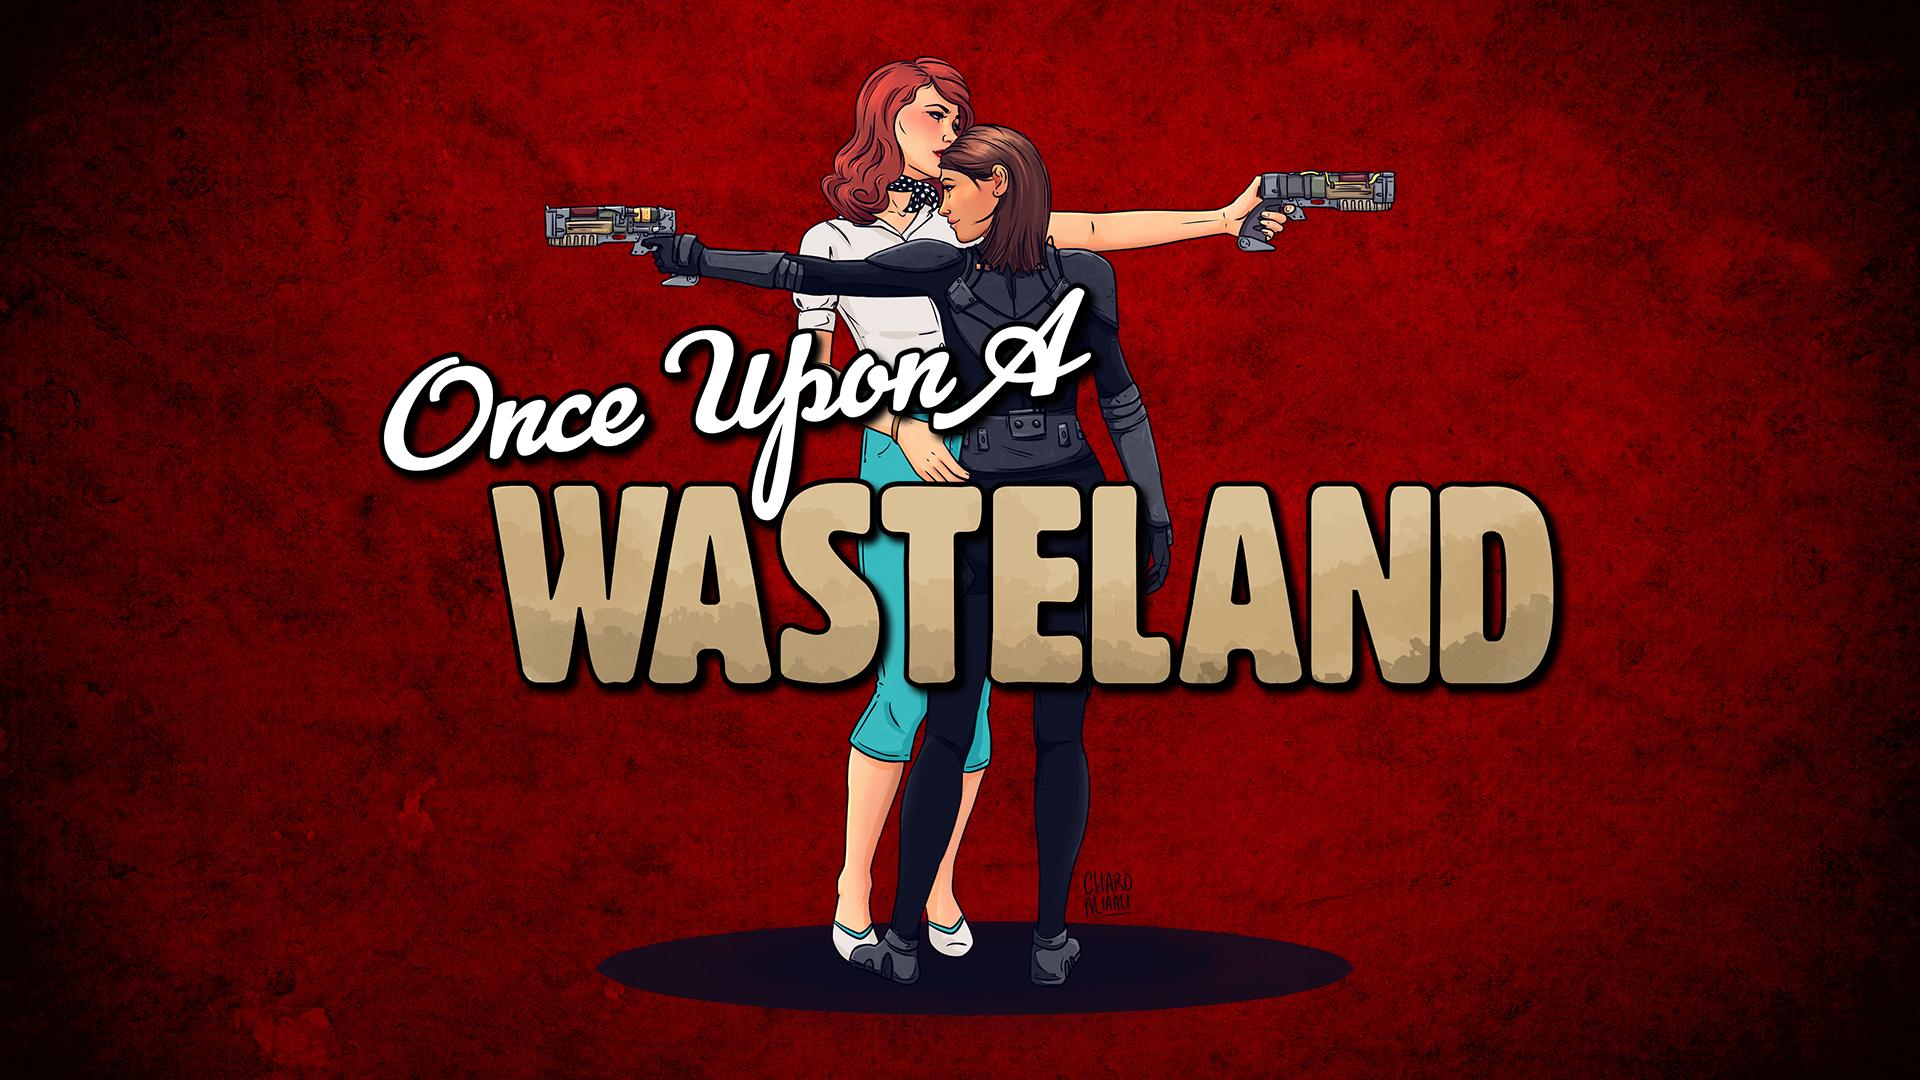 Once Upon a Wasteland